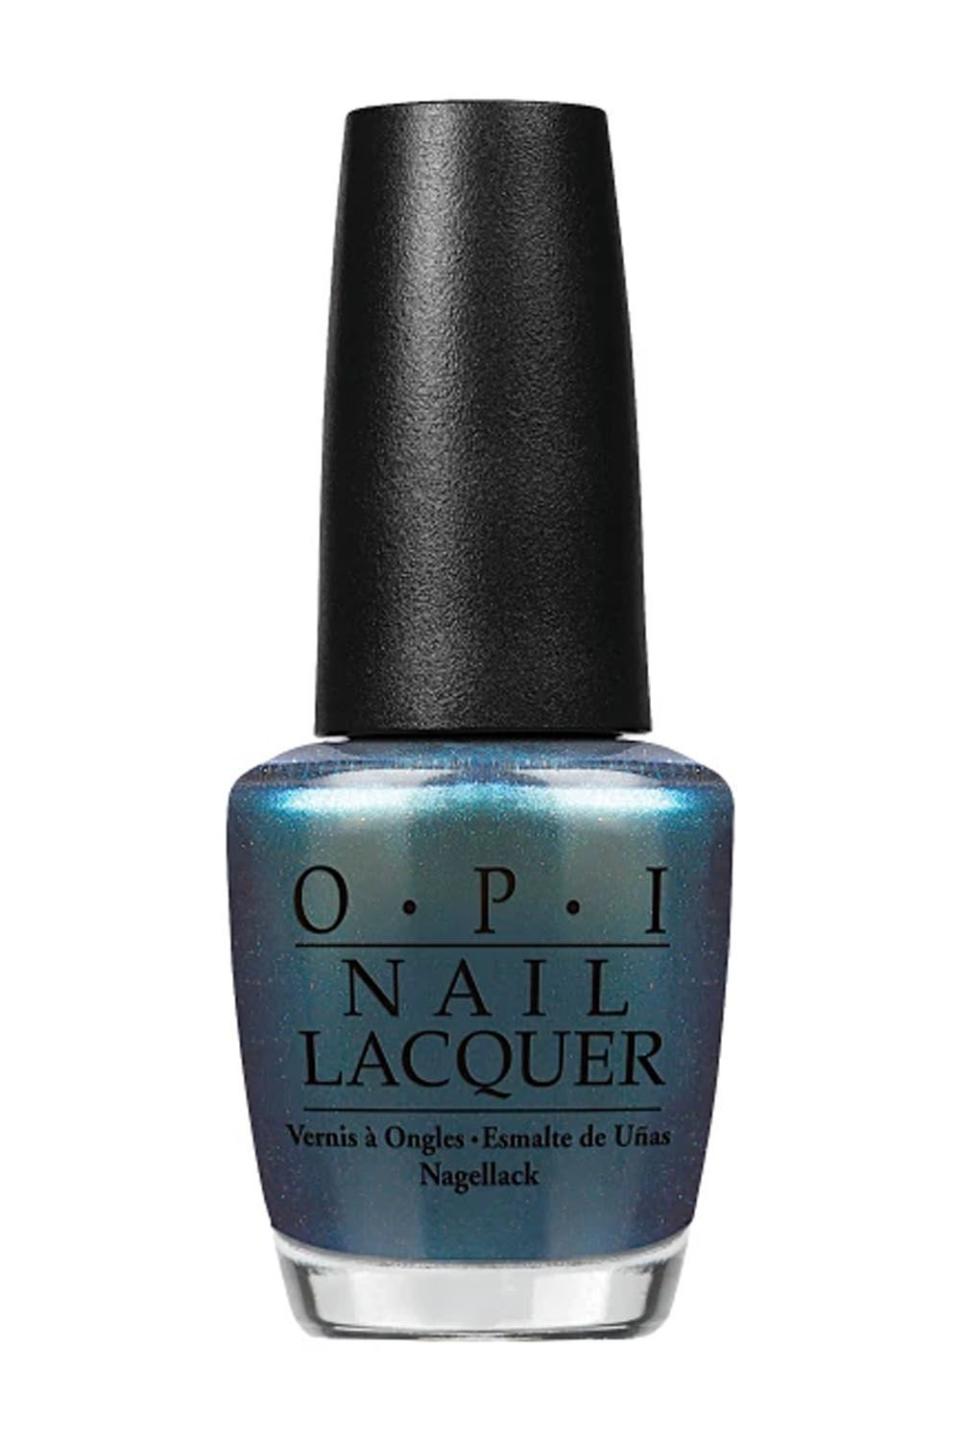 7) OPI Nail Lacquer in This Color's Making Waves